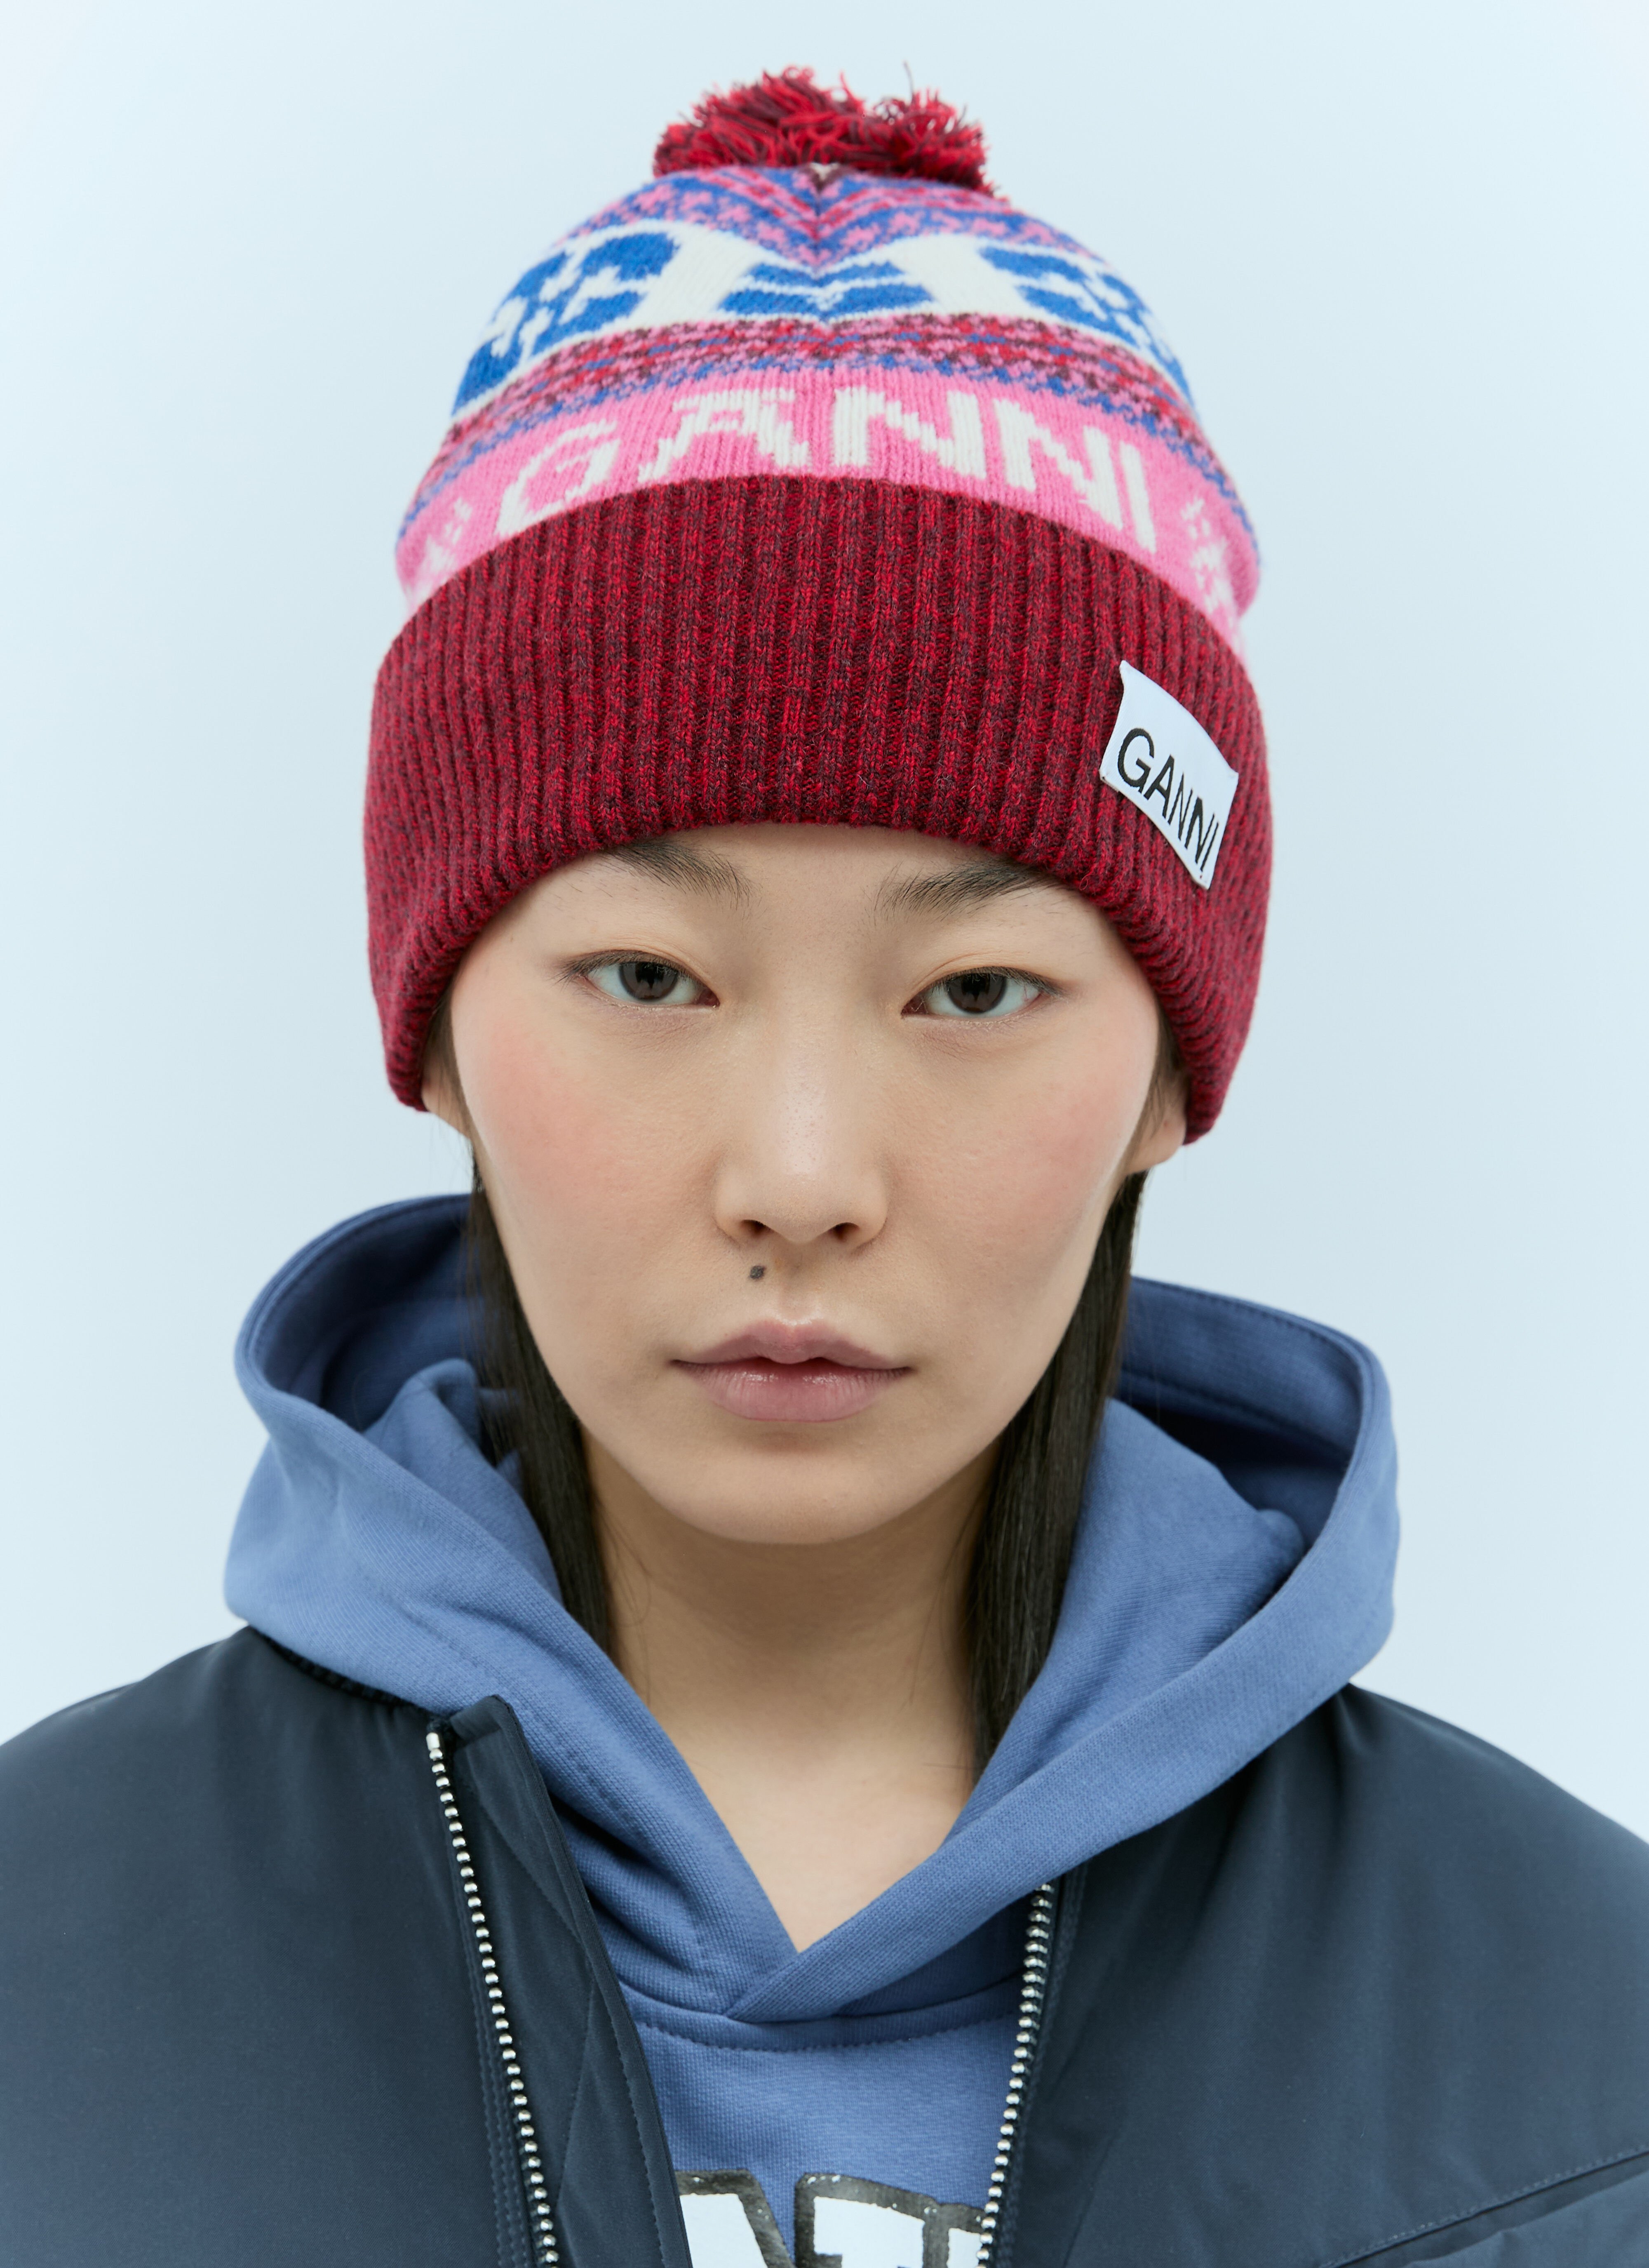 Women's Designer Beanies - Knit Beanie Hats | Find more at